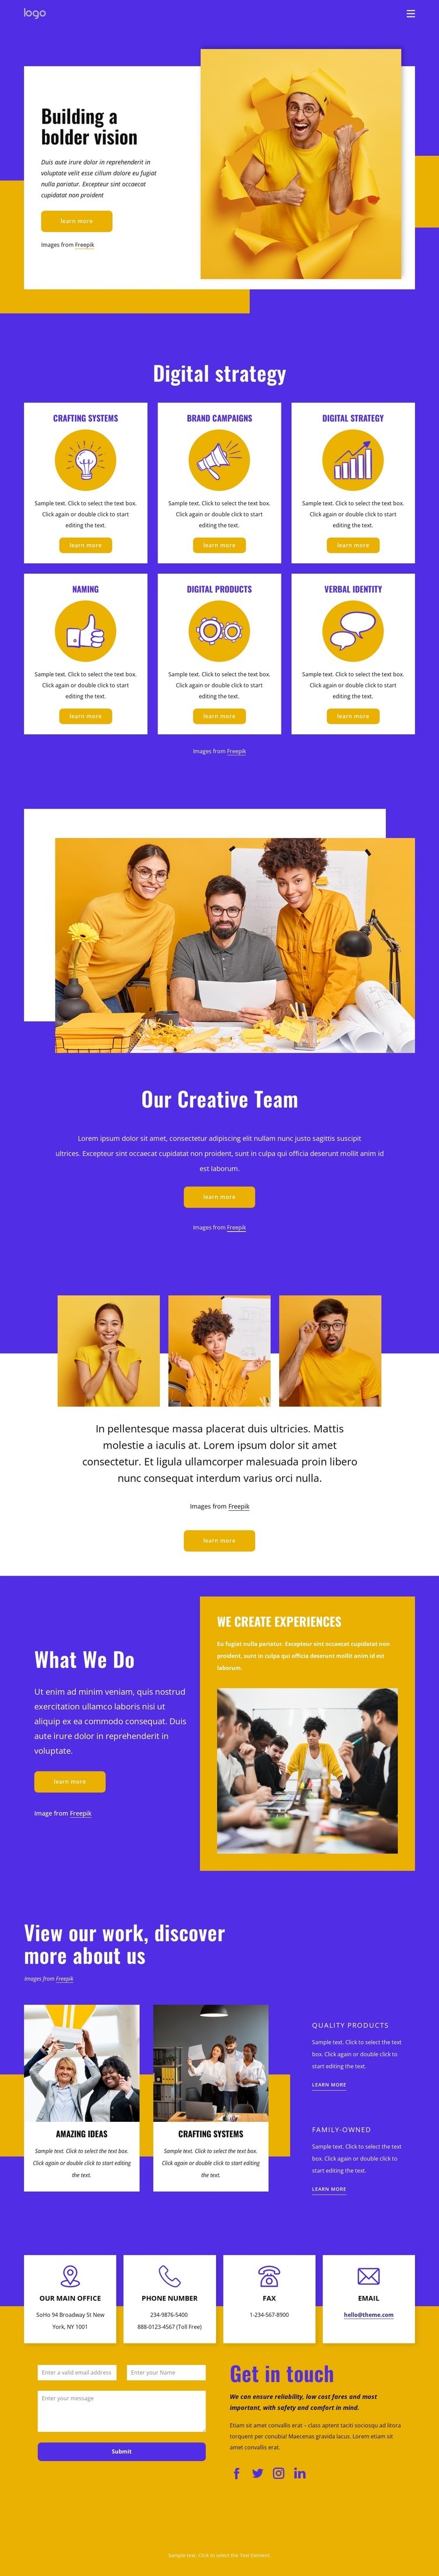 UX design and branding agency Homepage Design